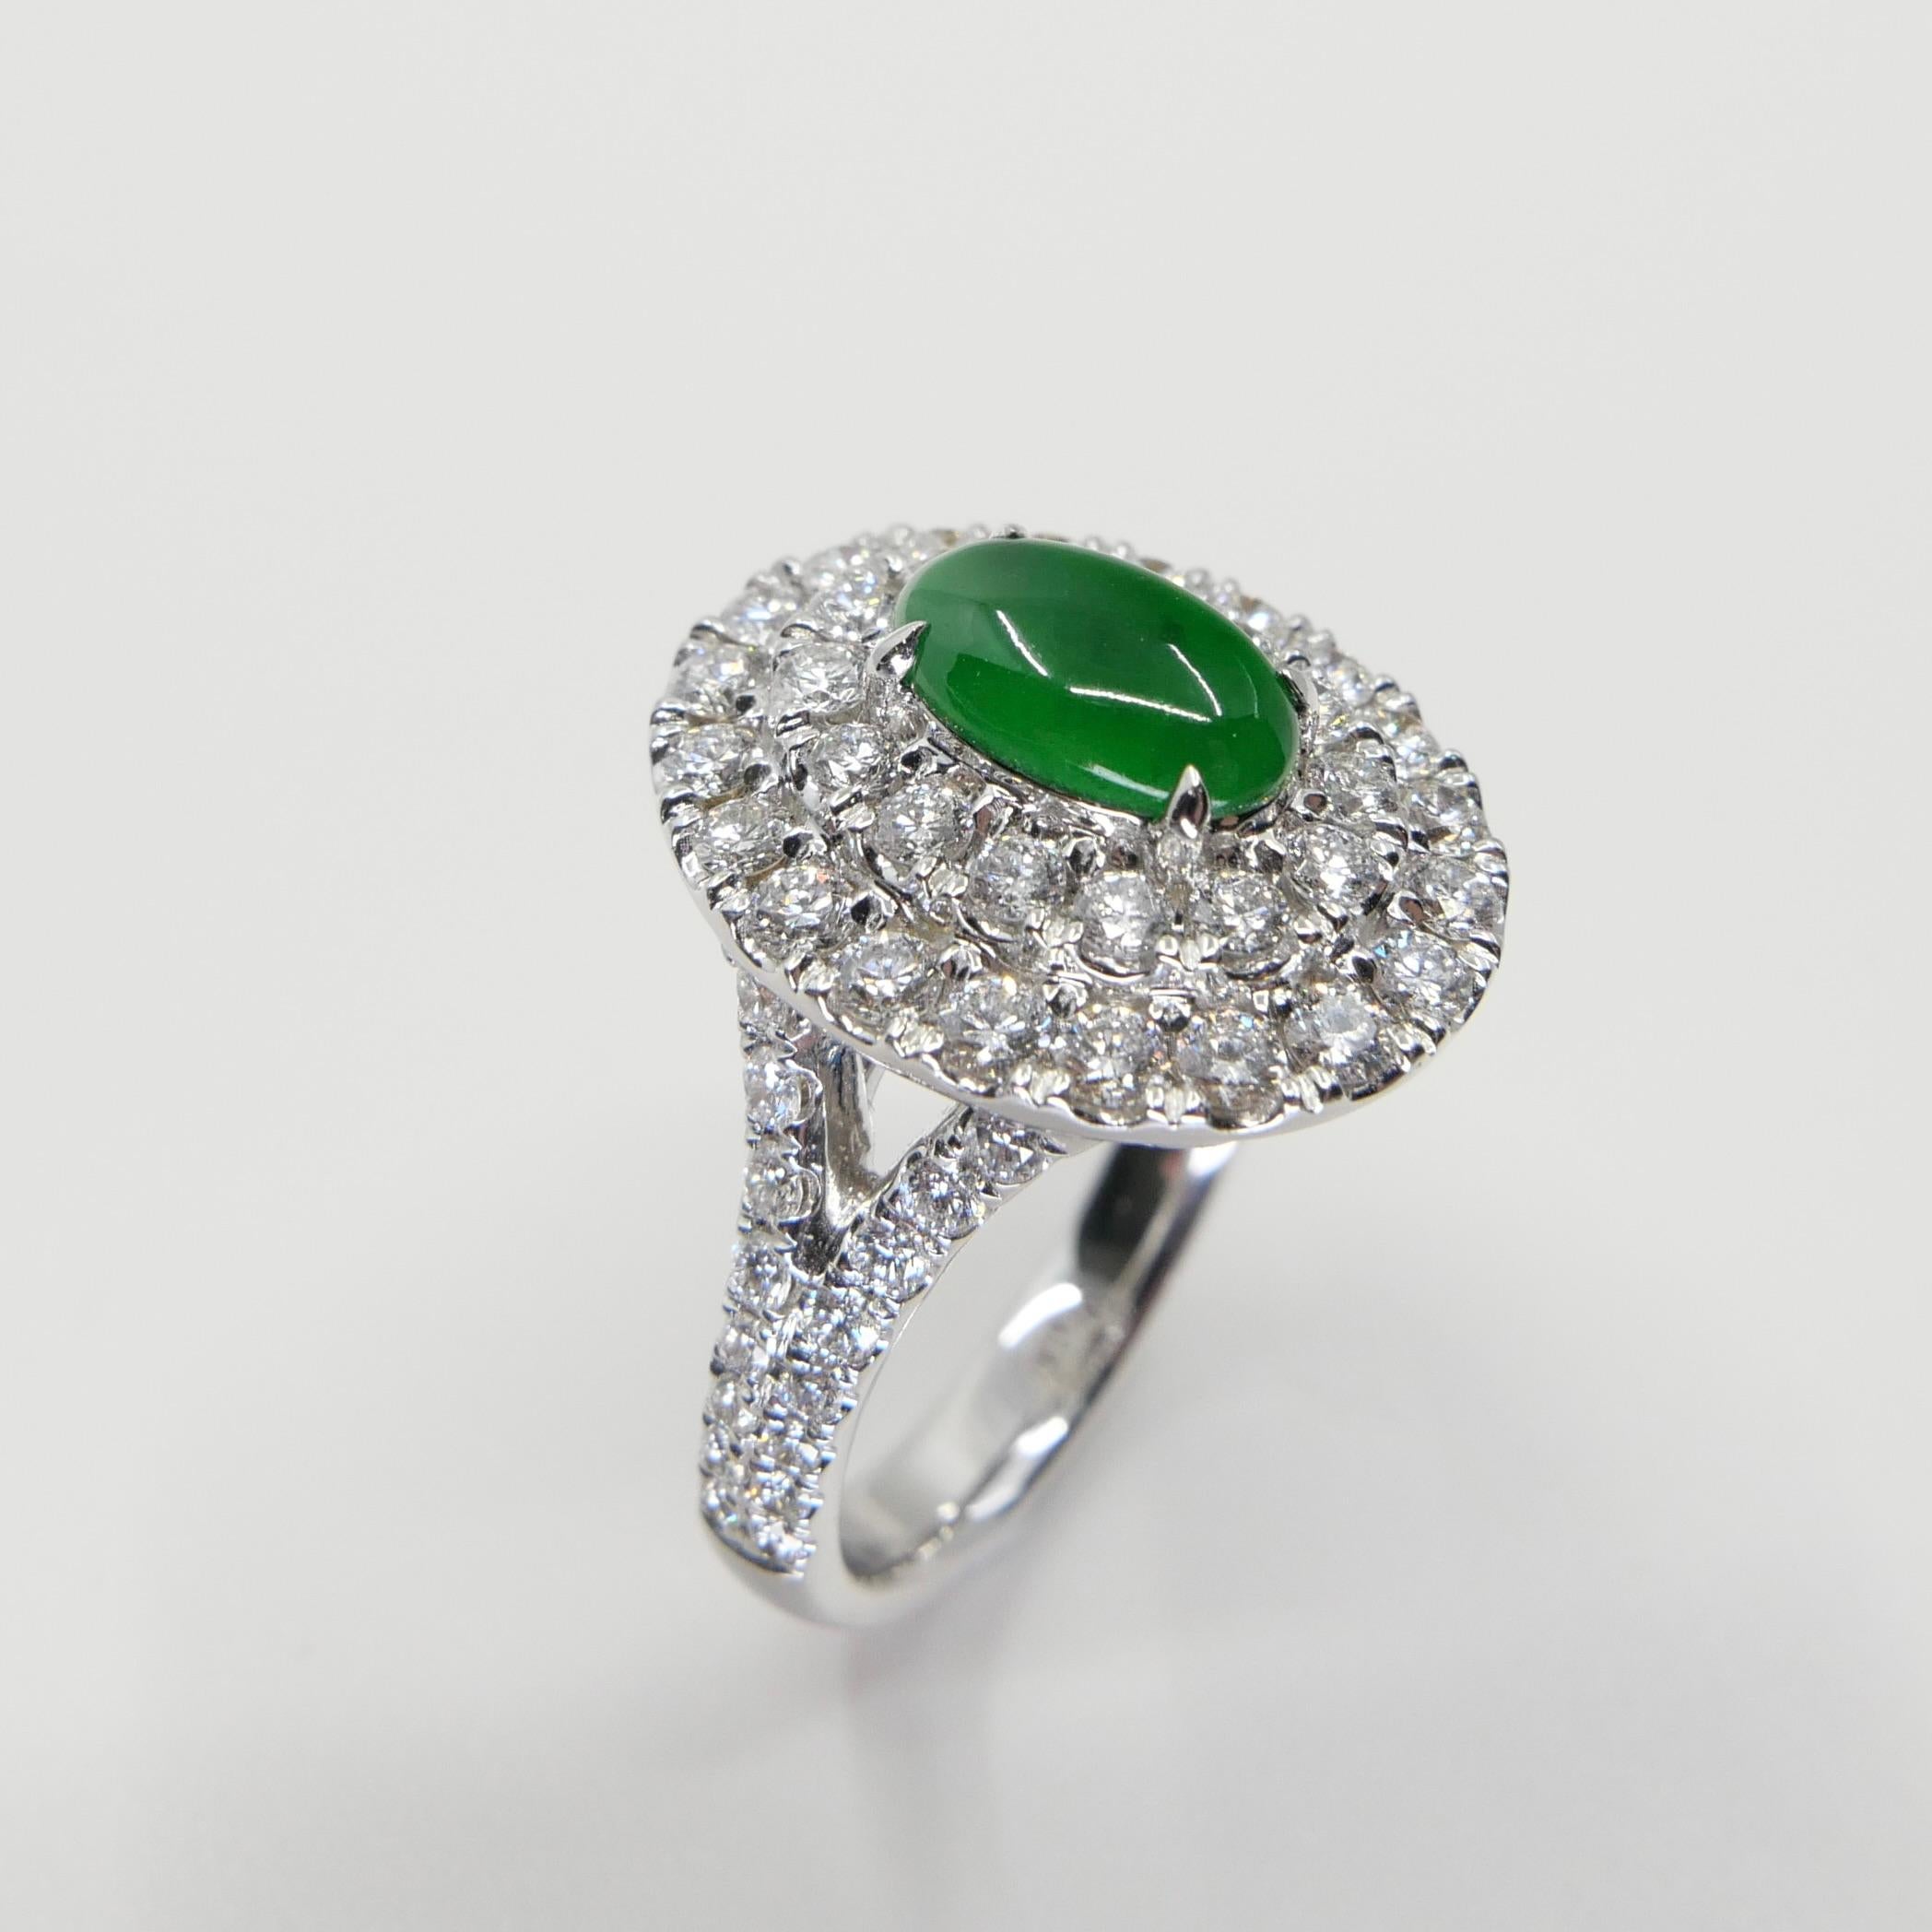 Certified Type A Jadeite Jade and Diamond Cocktail Ring, Close to Imperial Jade 4